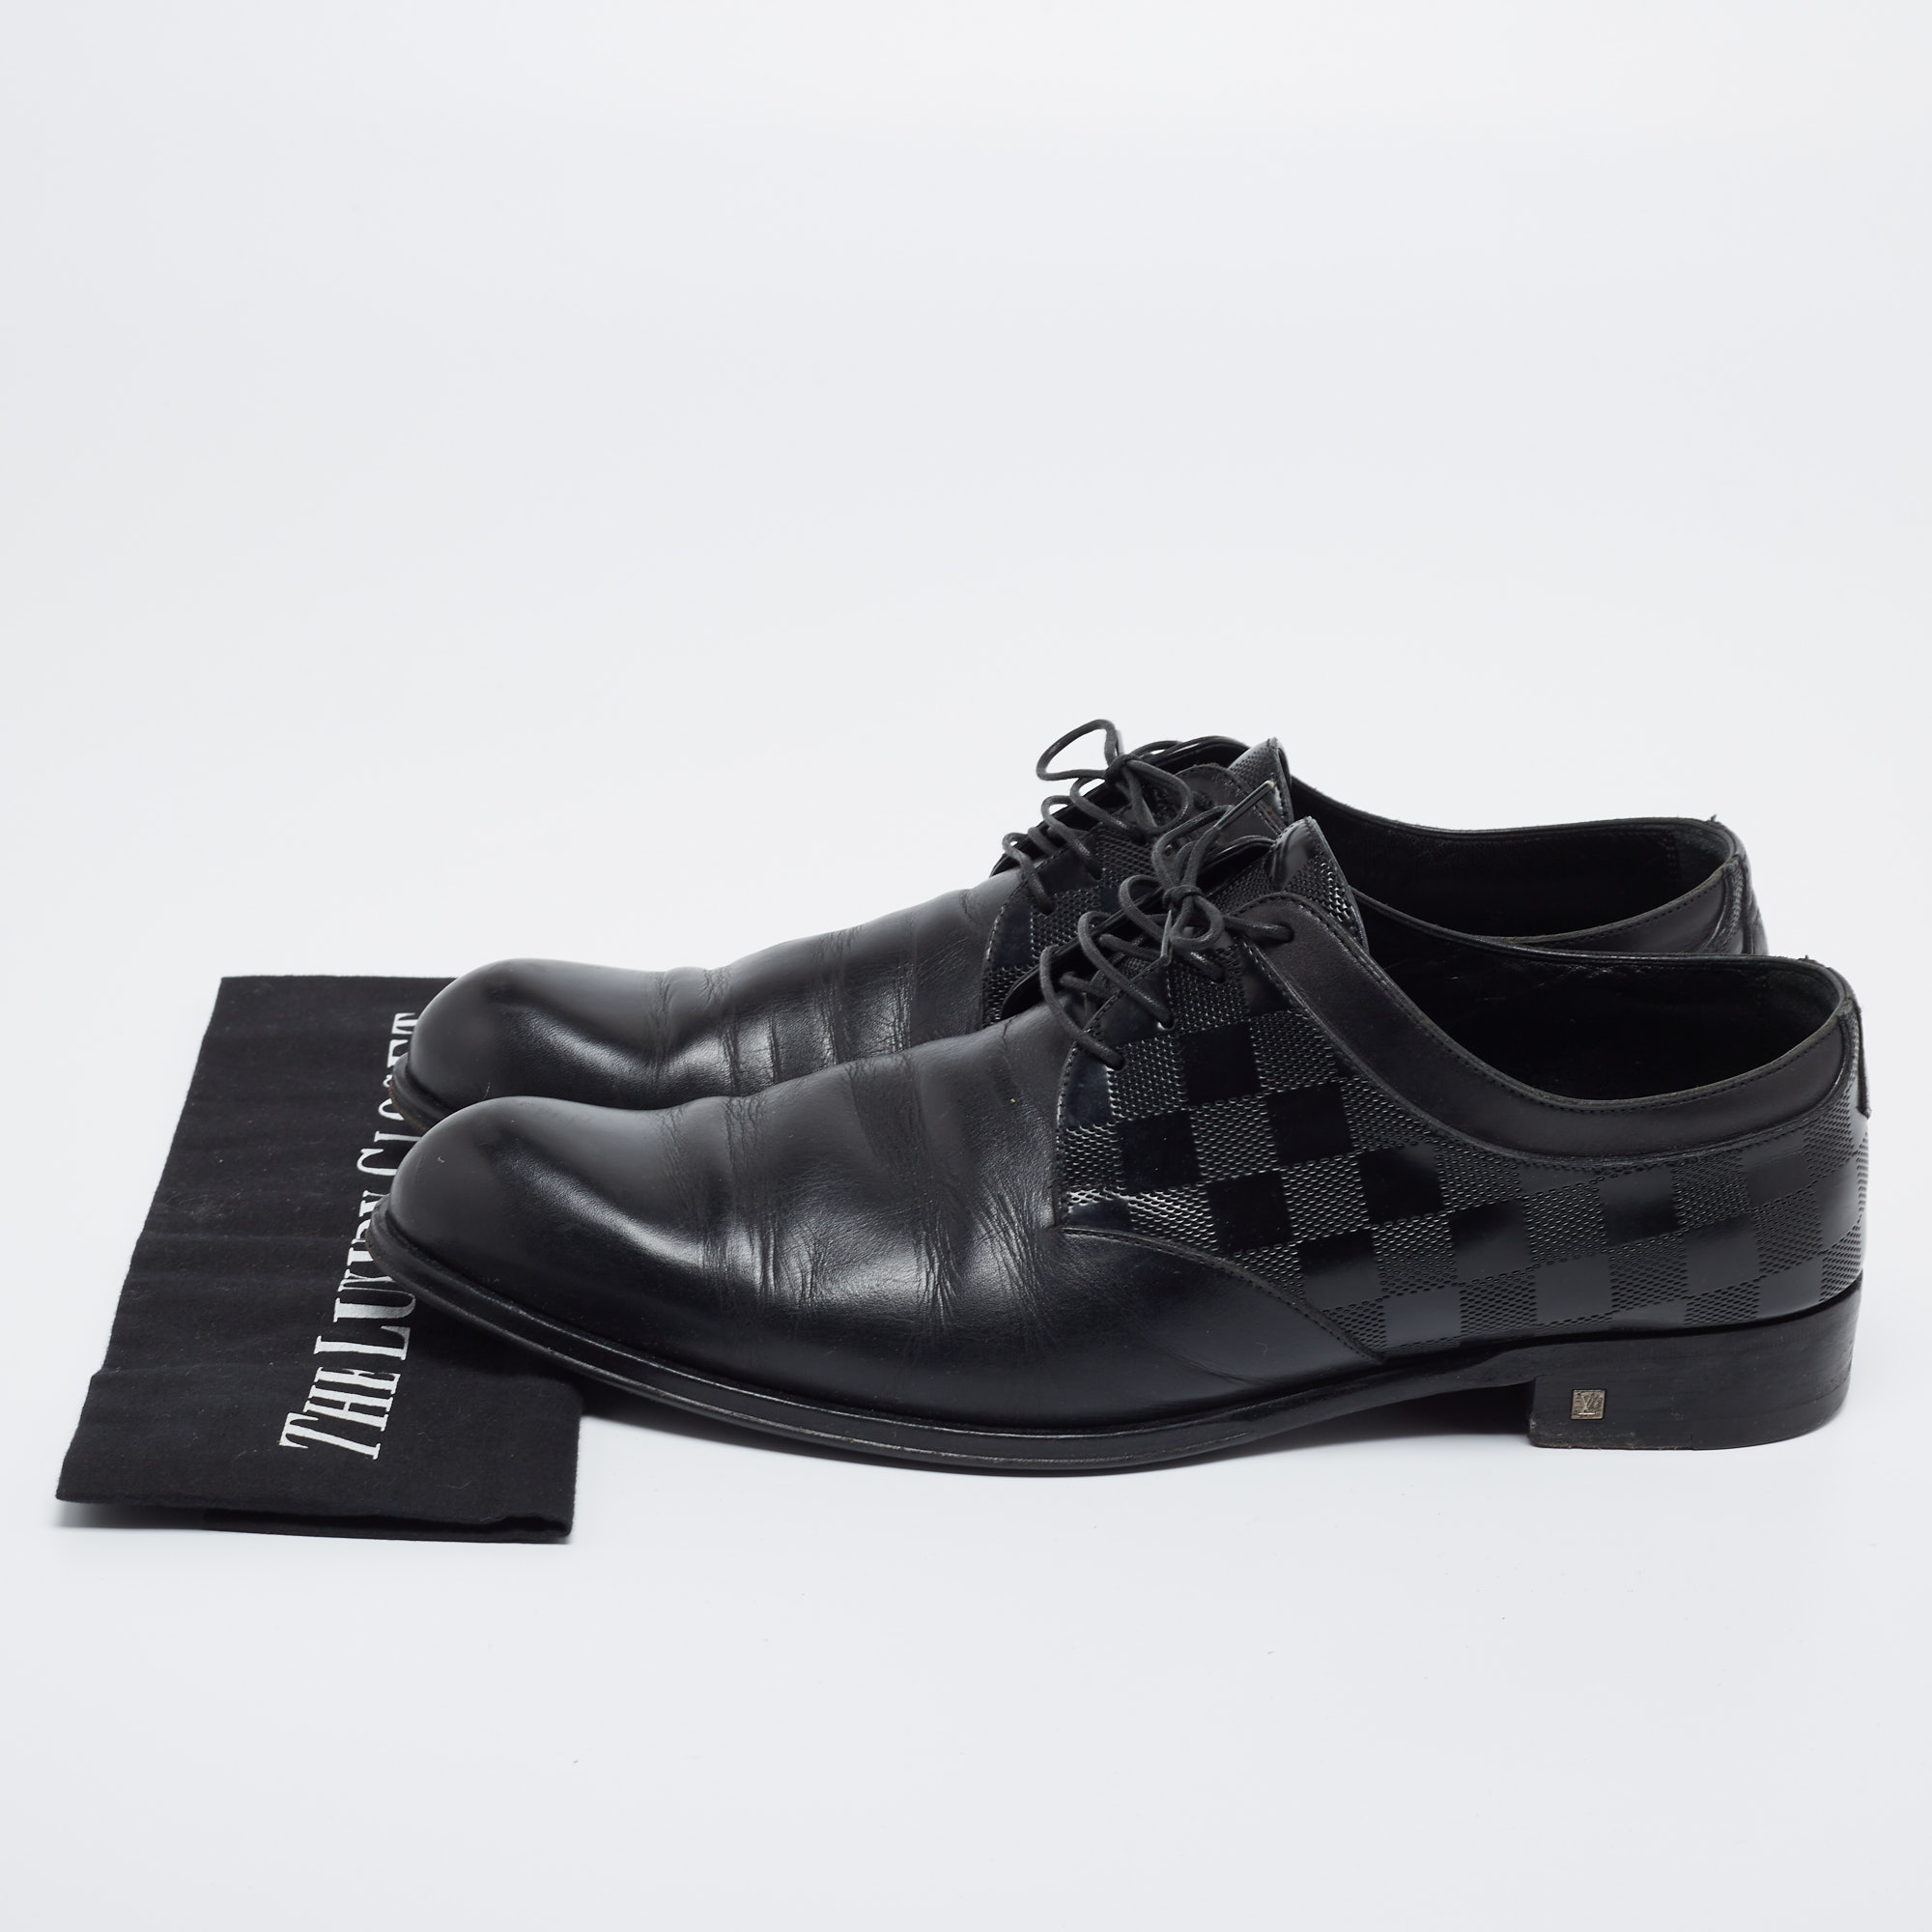 Louis Vuitton Black Damier Embossed Leather Lace-Up Derby Size 43